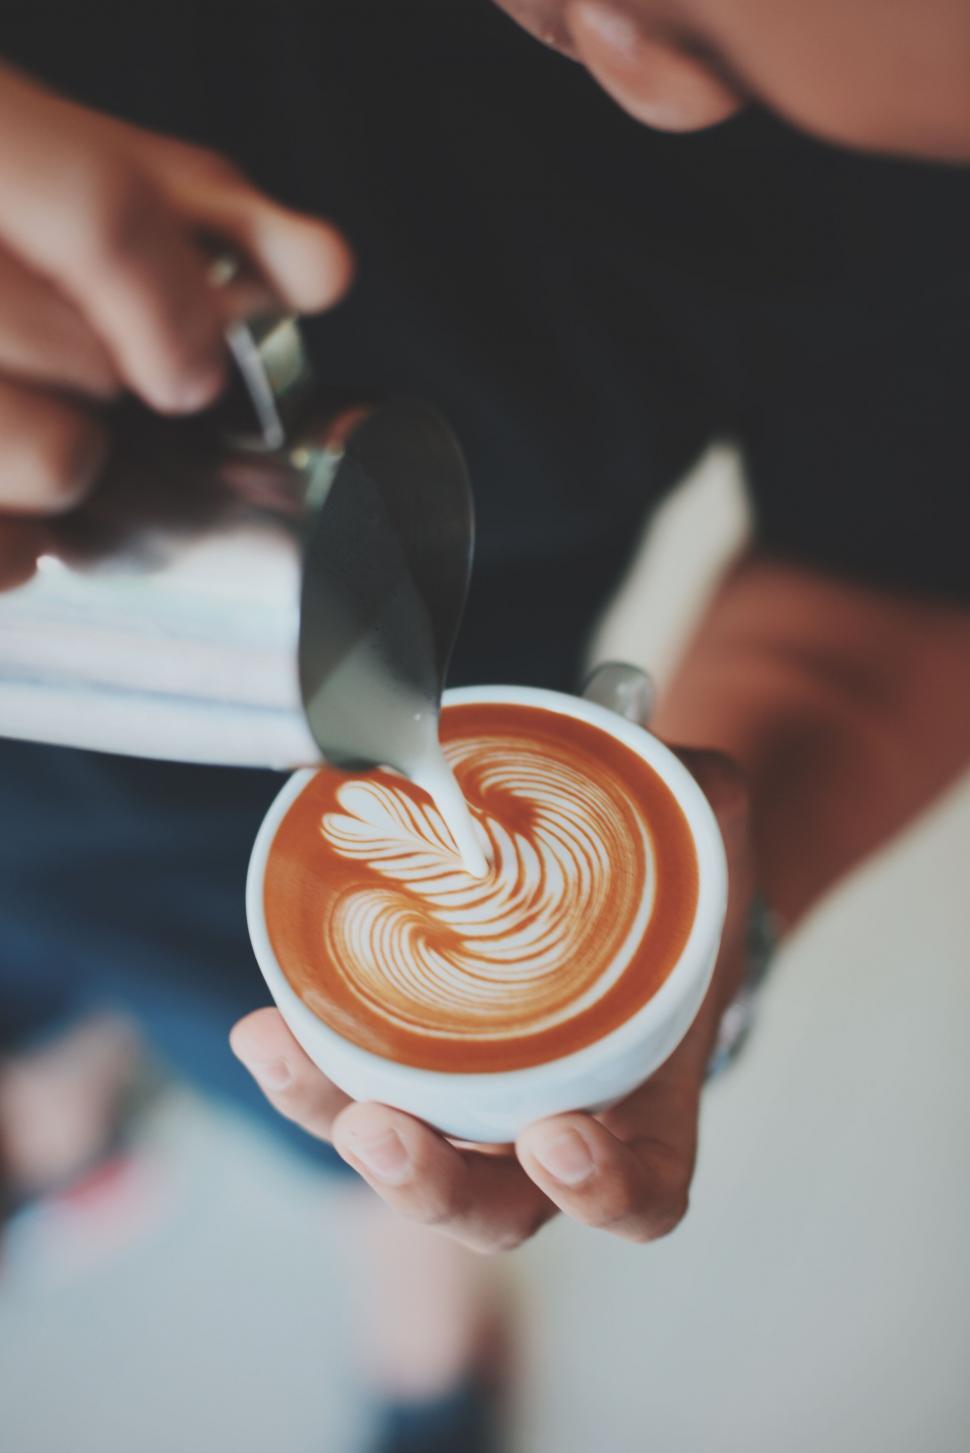 Free Image of Barista creating latte art in coffee cup 